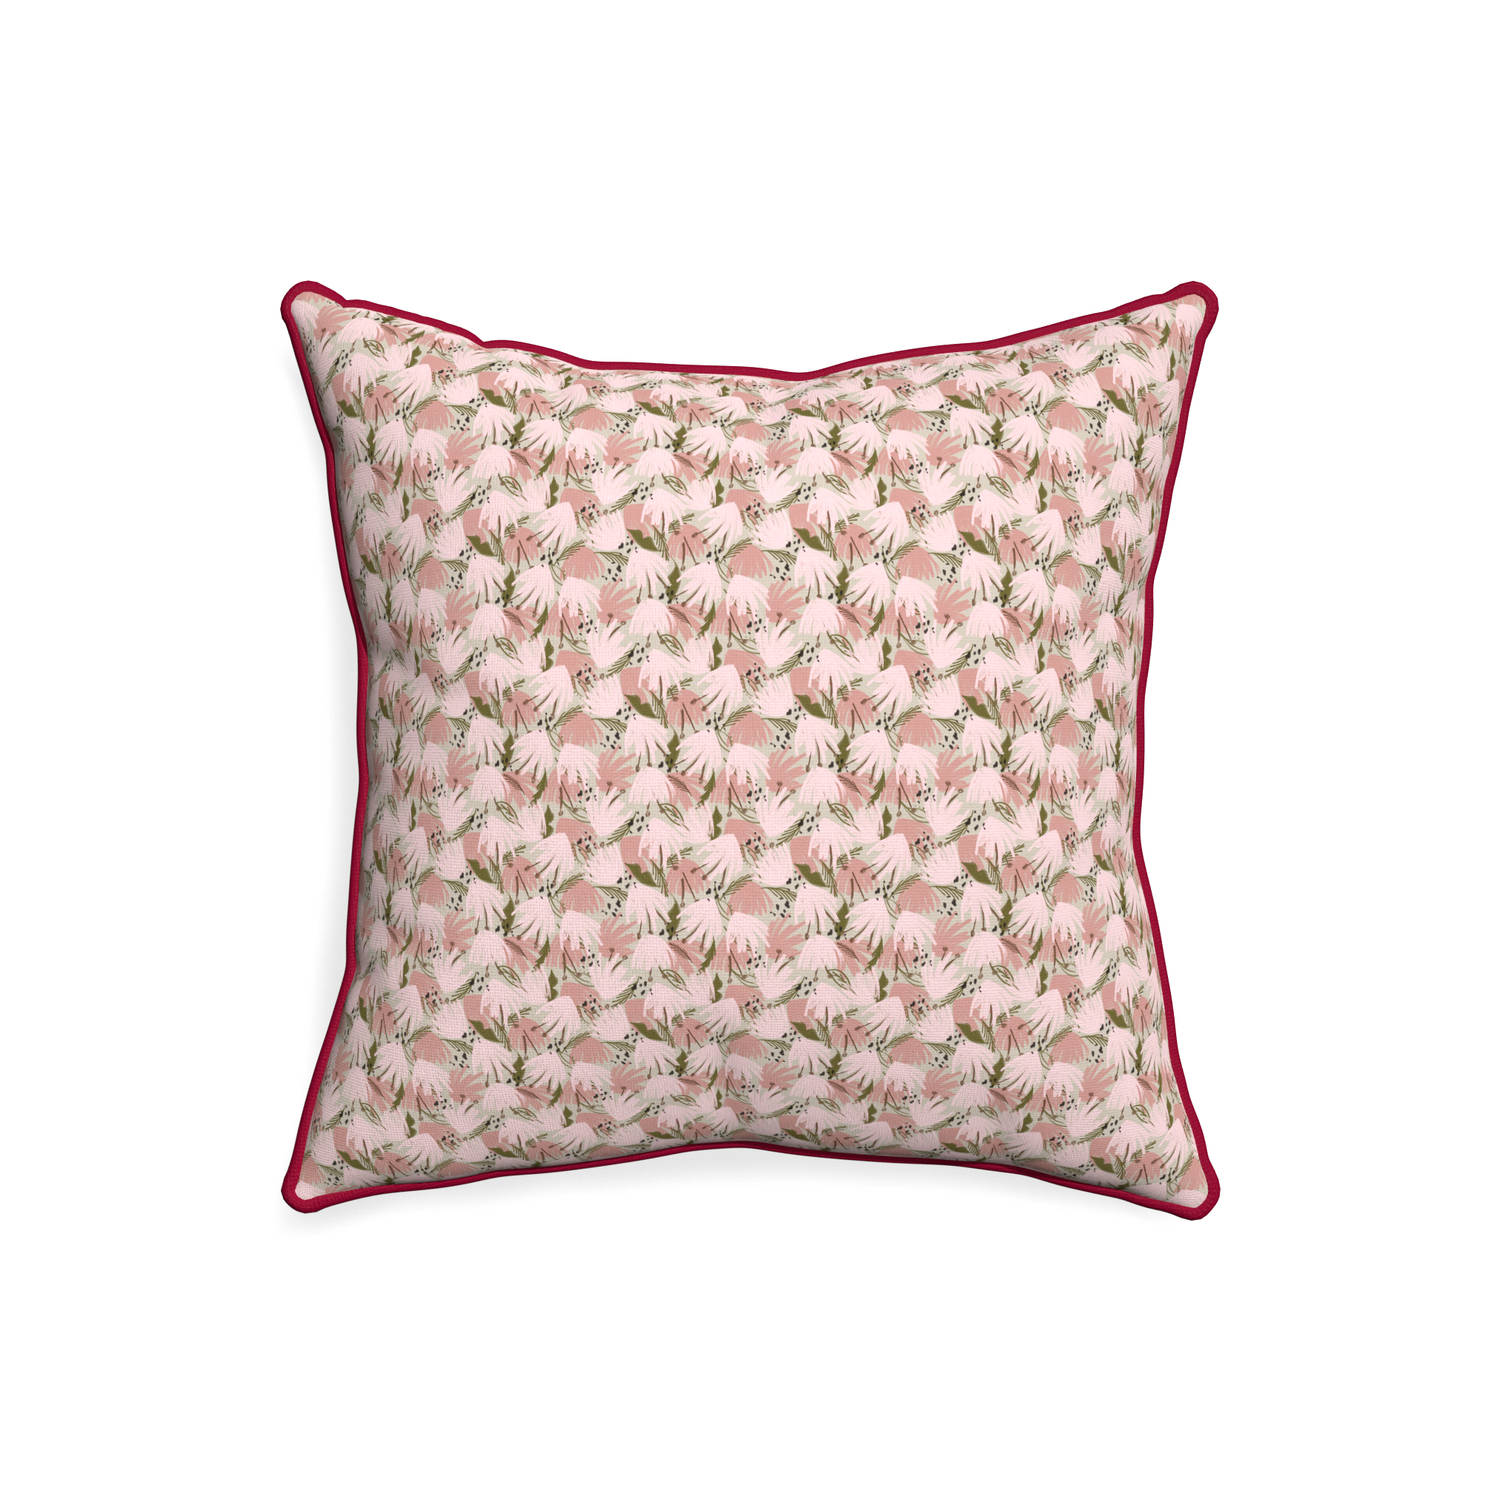 20-square eden pink custom pink floralpillow with raspberry piping on white background